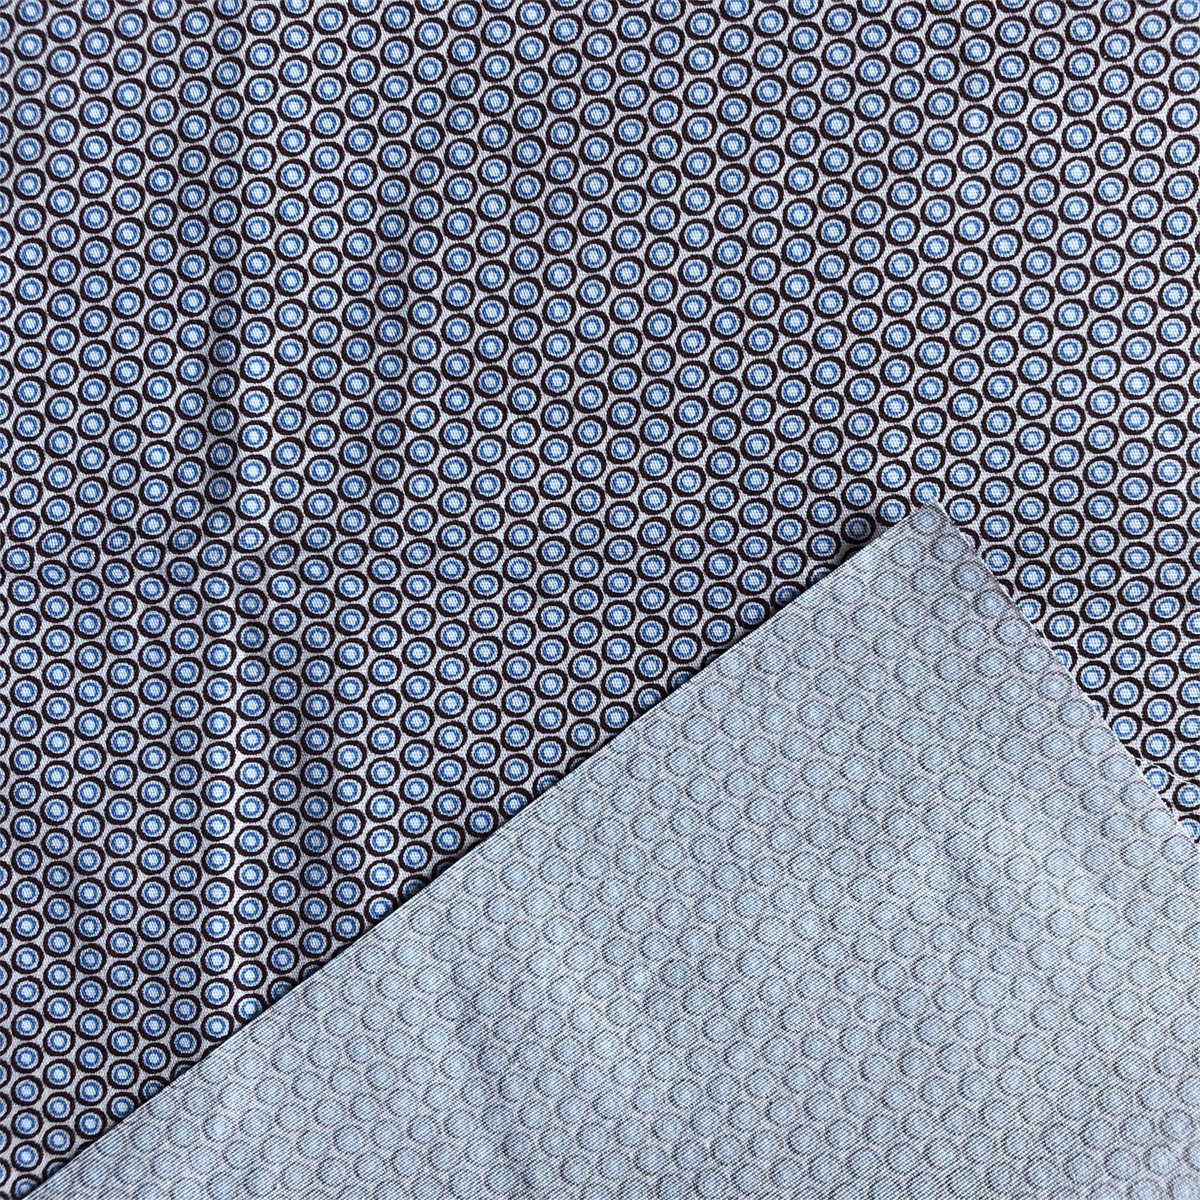 Cotton Spandex Fabric by compact yarn for men's casual shirts cotton spandex poplin printed shirts woven elasthane fabric